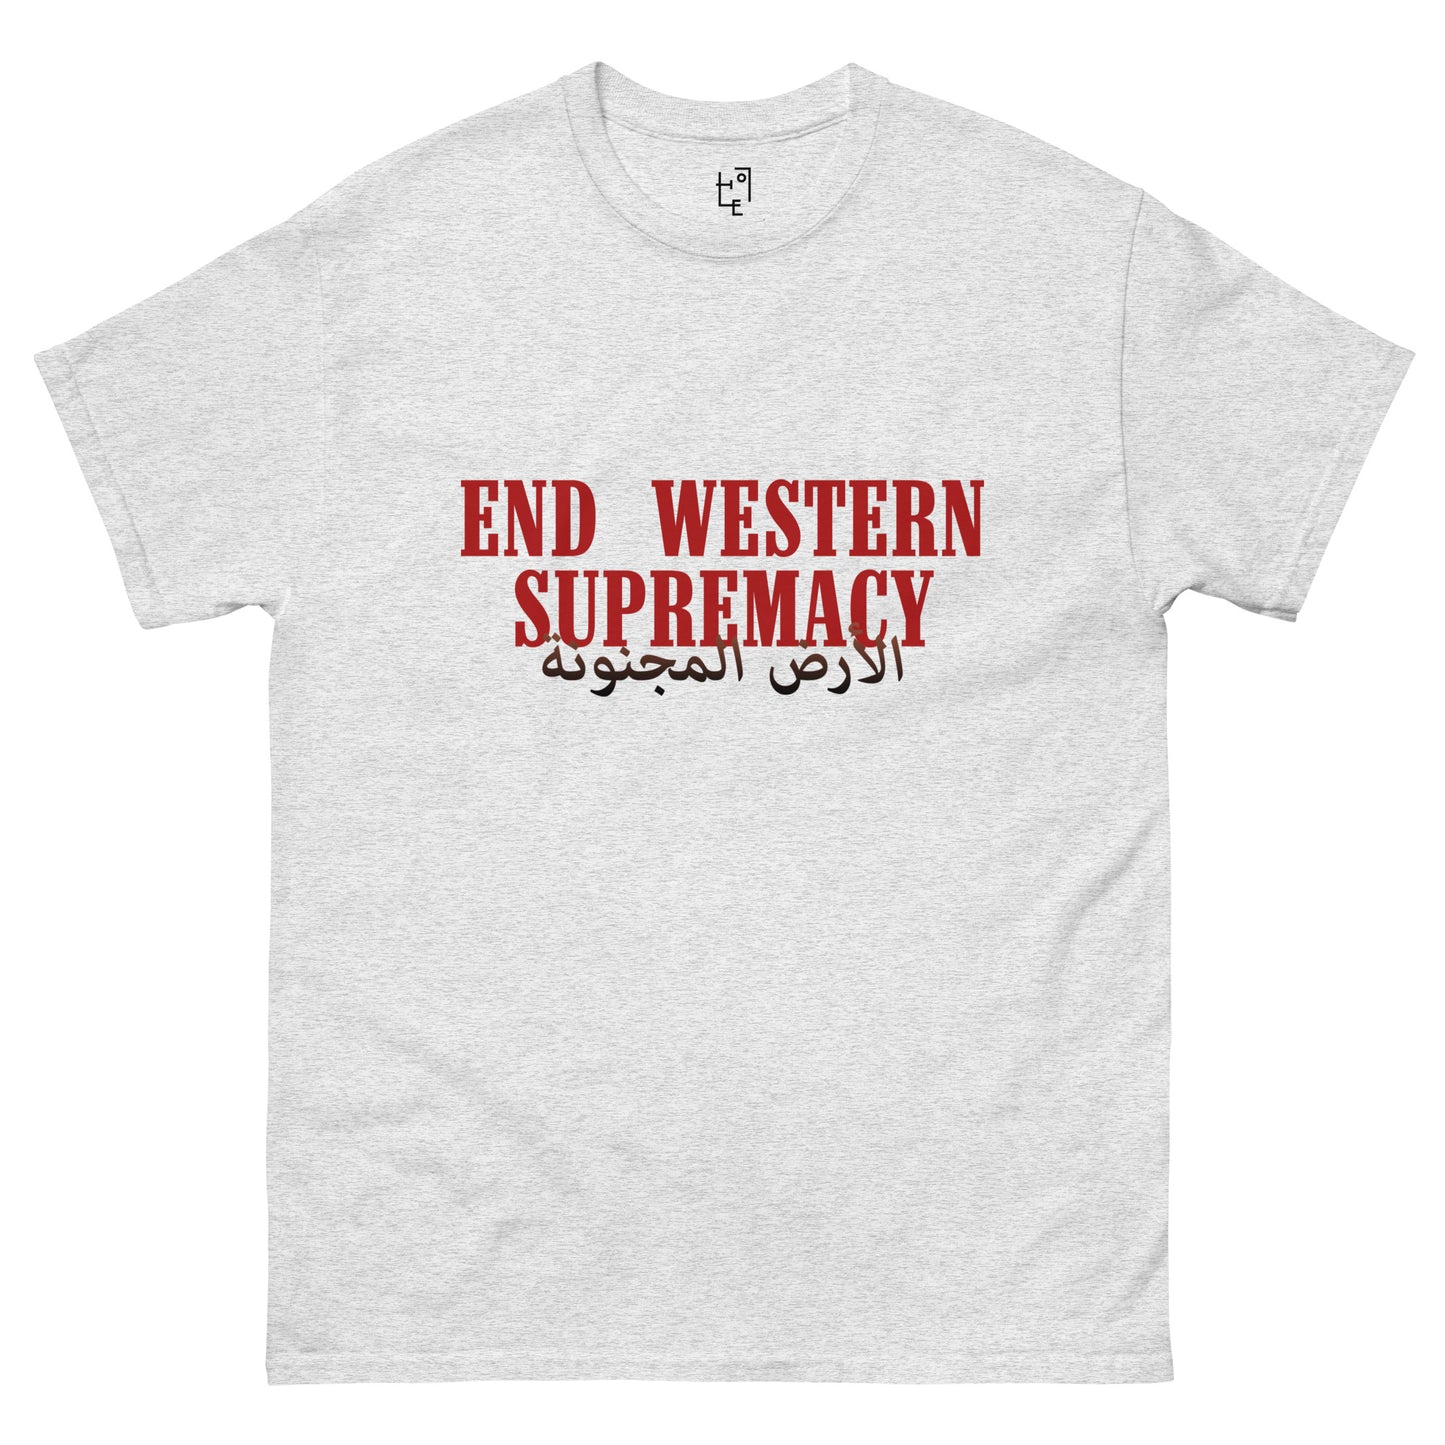 END WESTERN SUPREMACY T